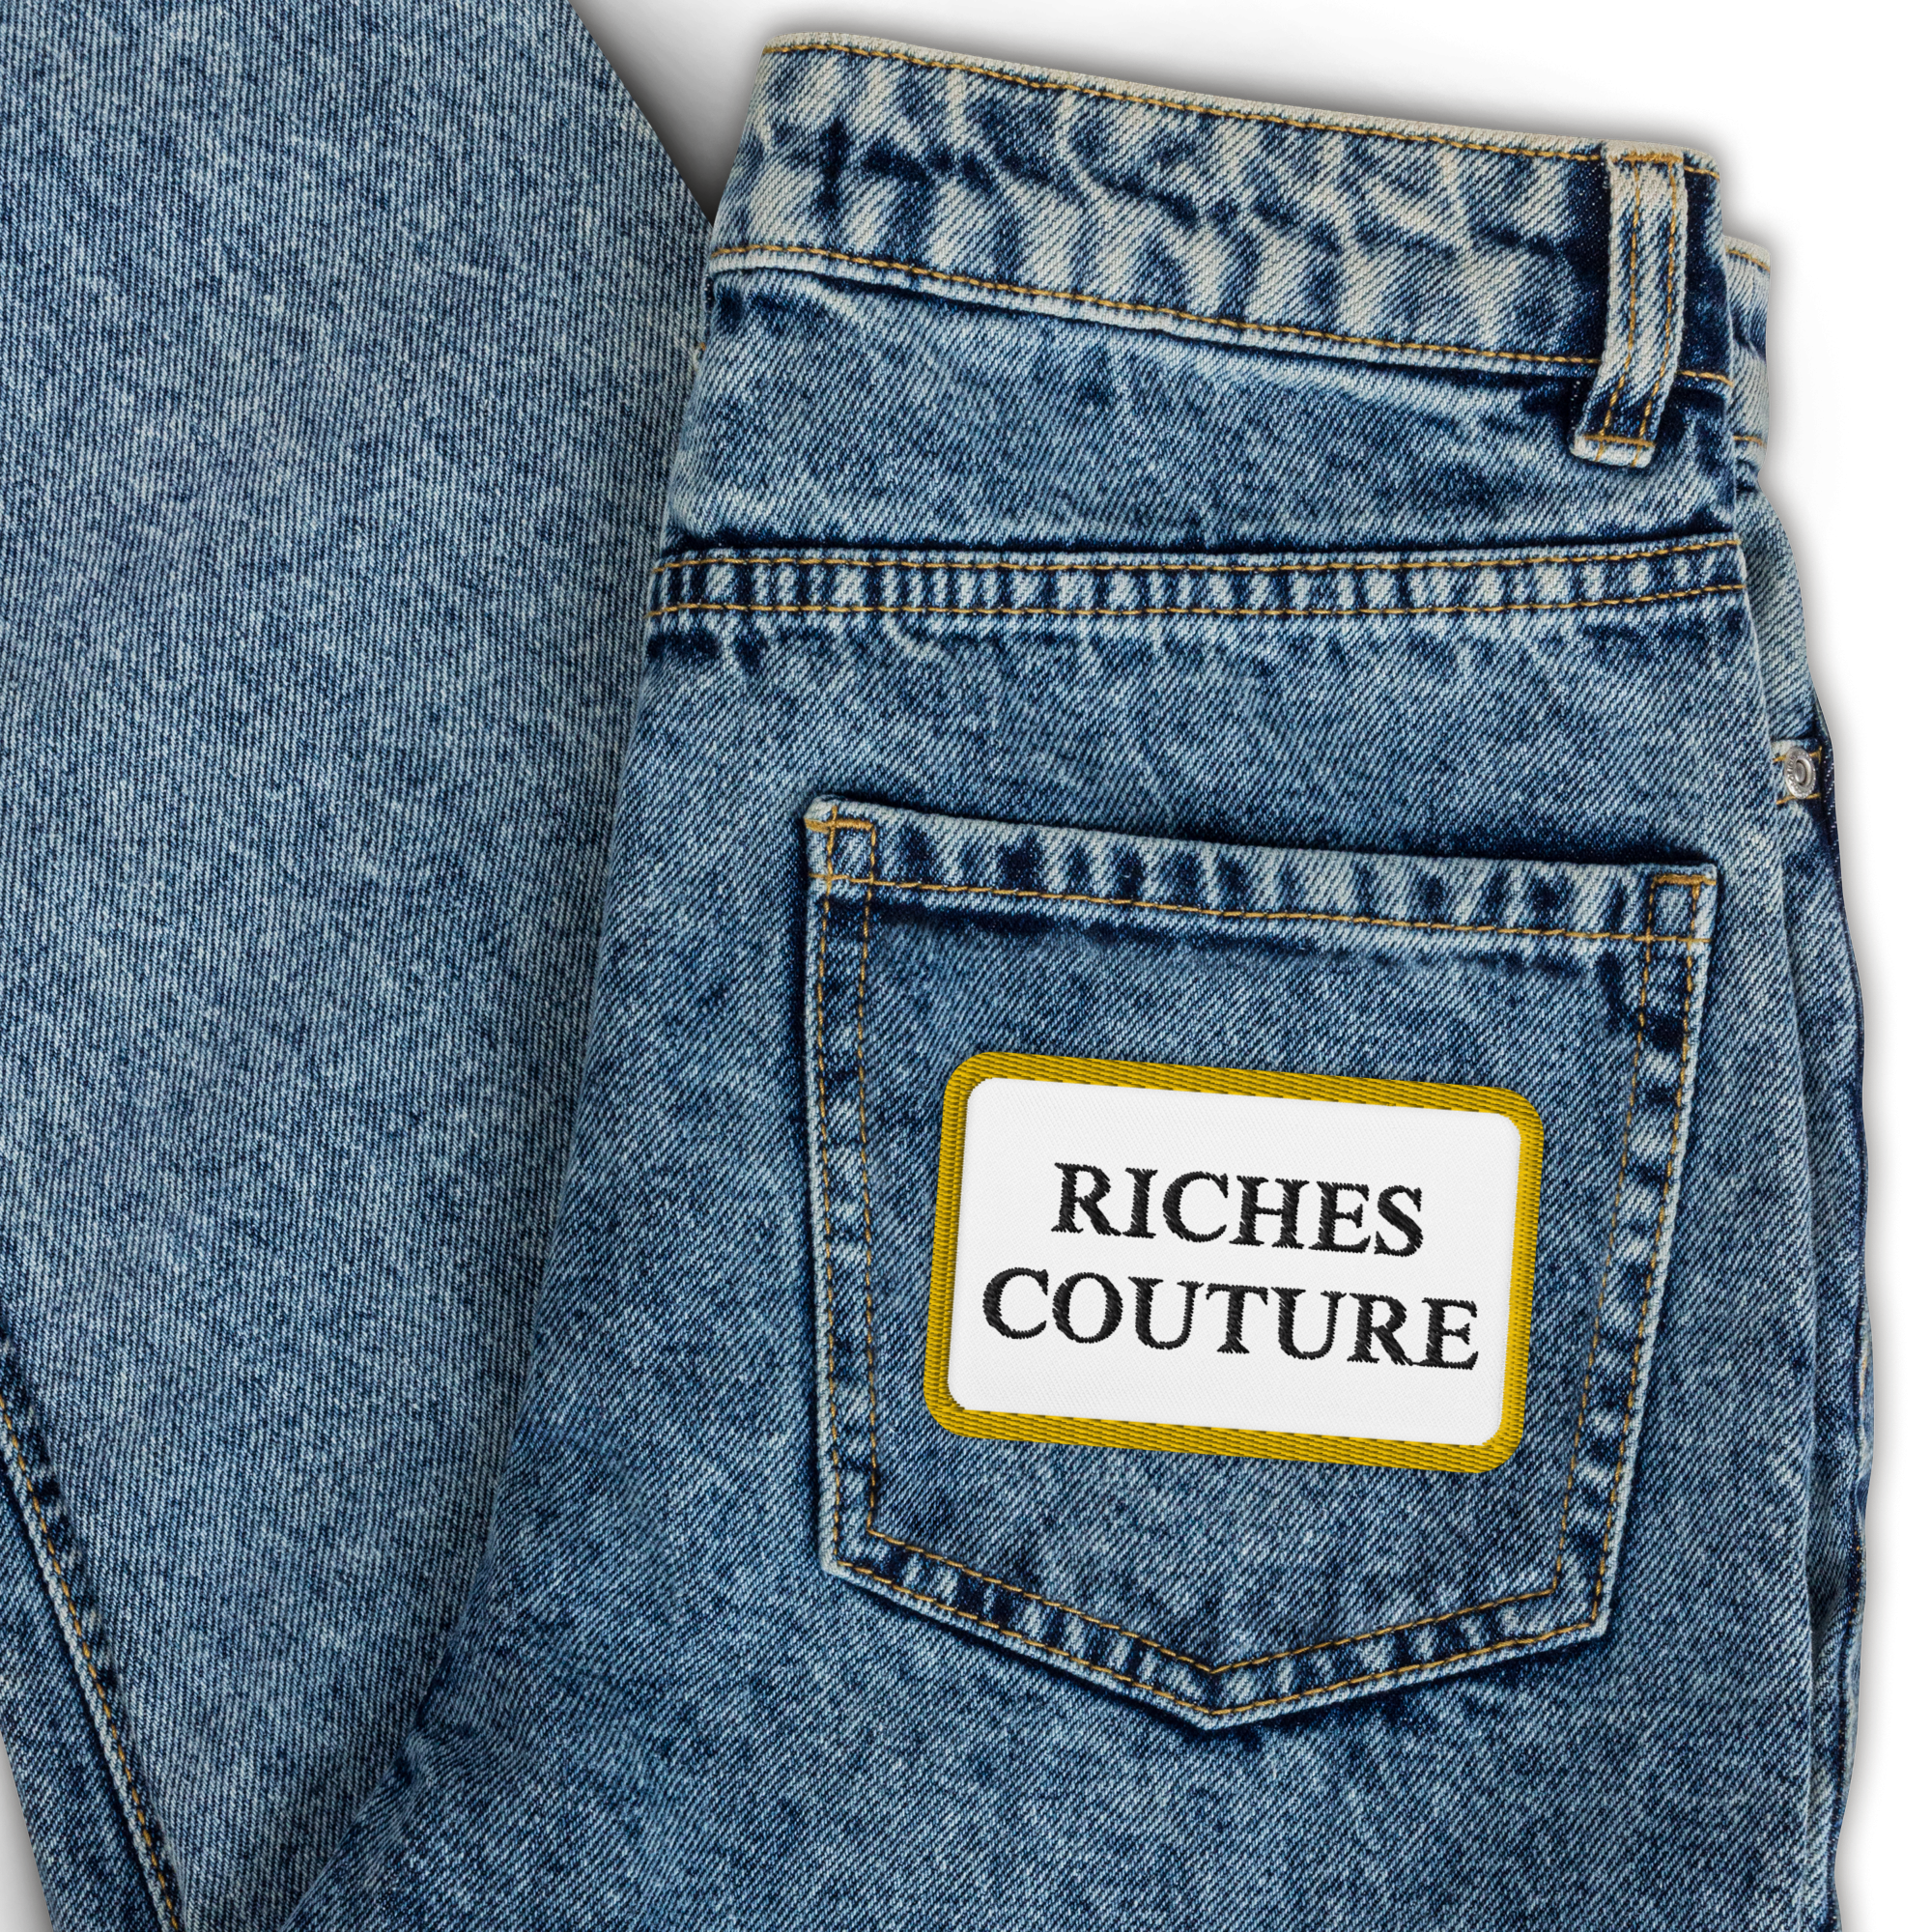 Riches Couture Yellow Embroidered Patch